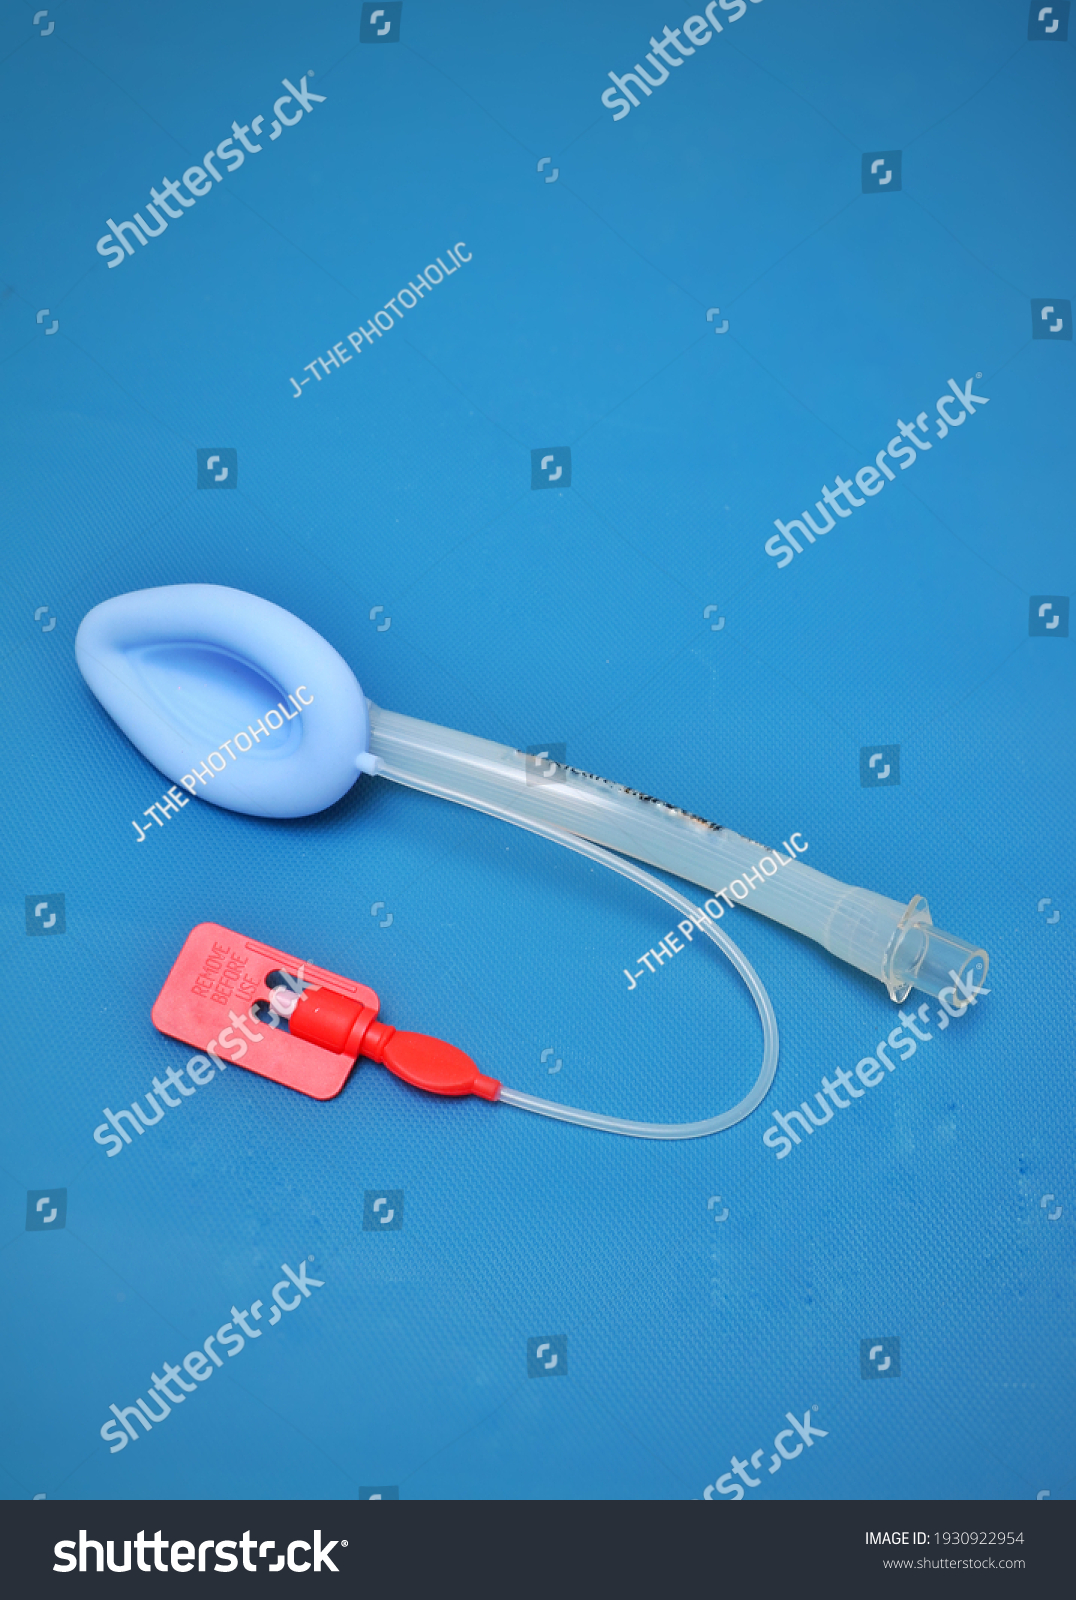 An adult laryngeal mask airway (LMA).It is a medical device that keeps a patient's airway open during anaesthesia or unconsciousness. It is a type of supraglottic airway device #1930922954